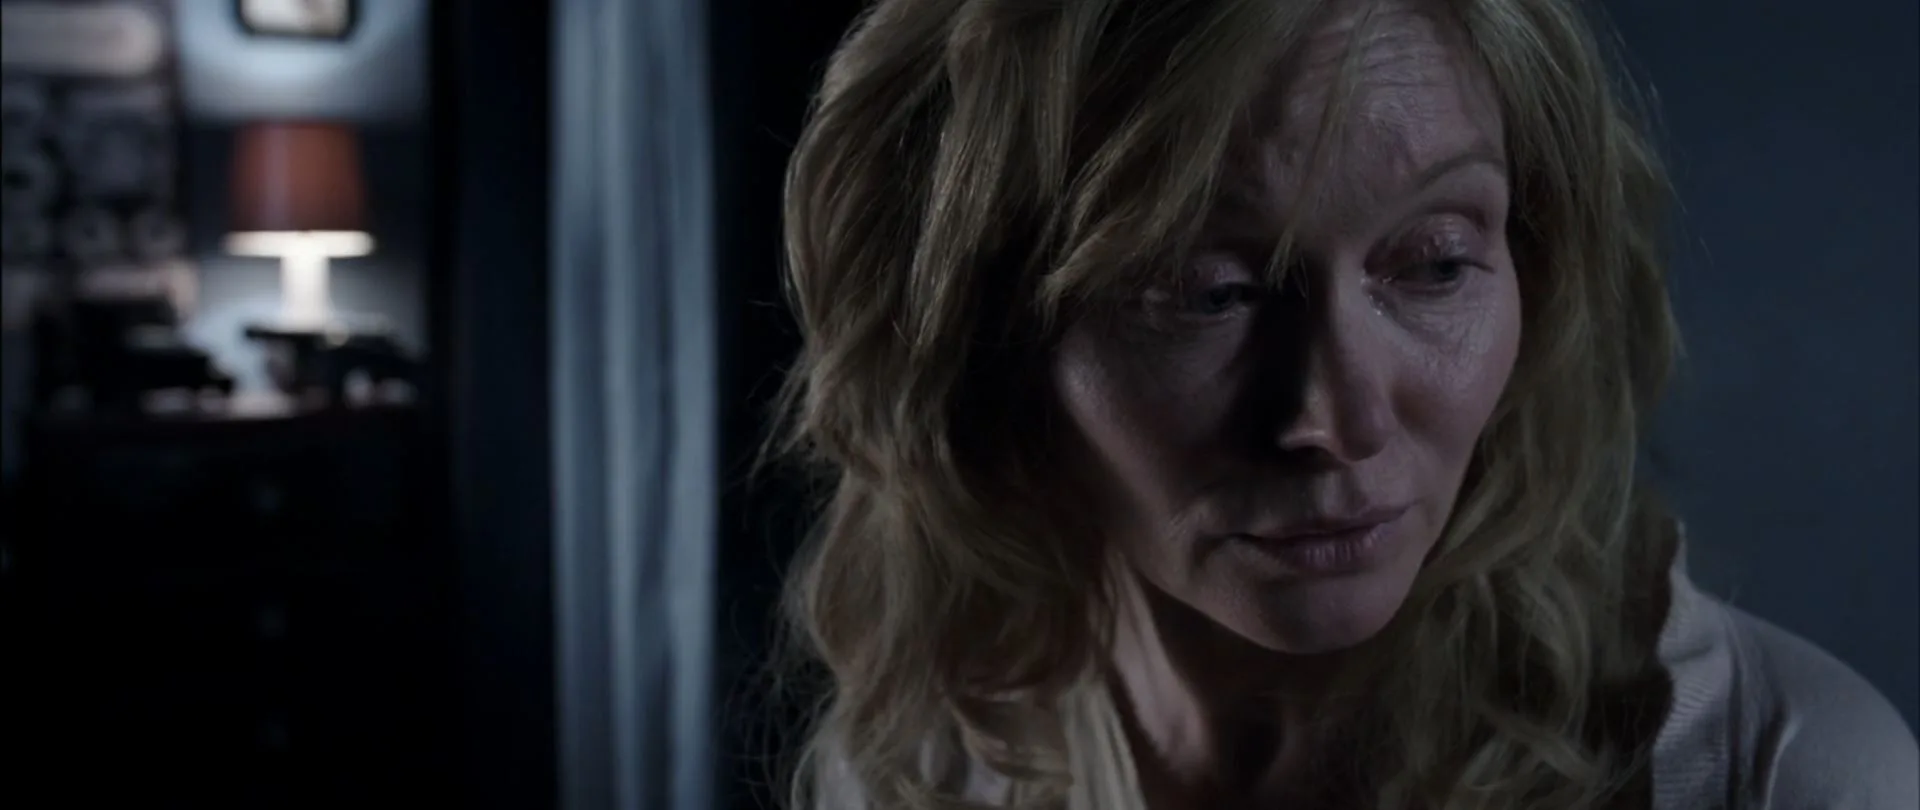 The Babadook (2014) Horror Movie Review